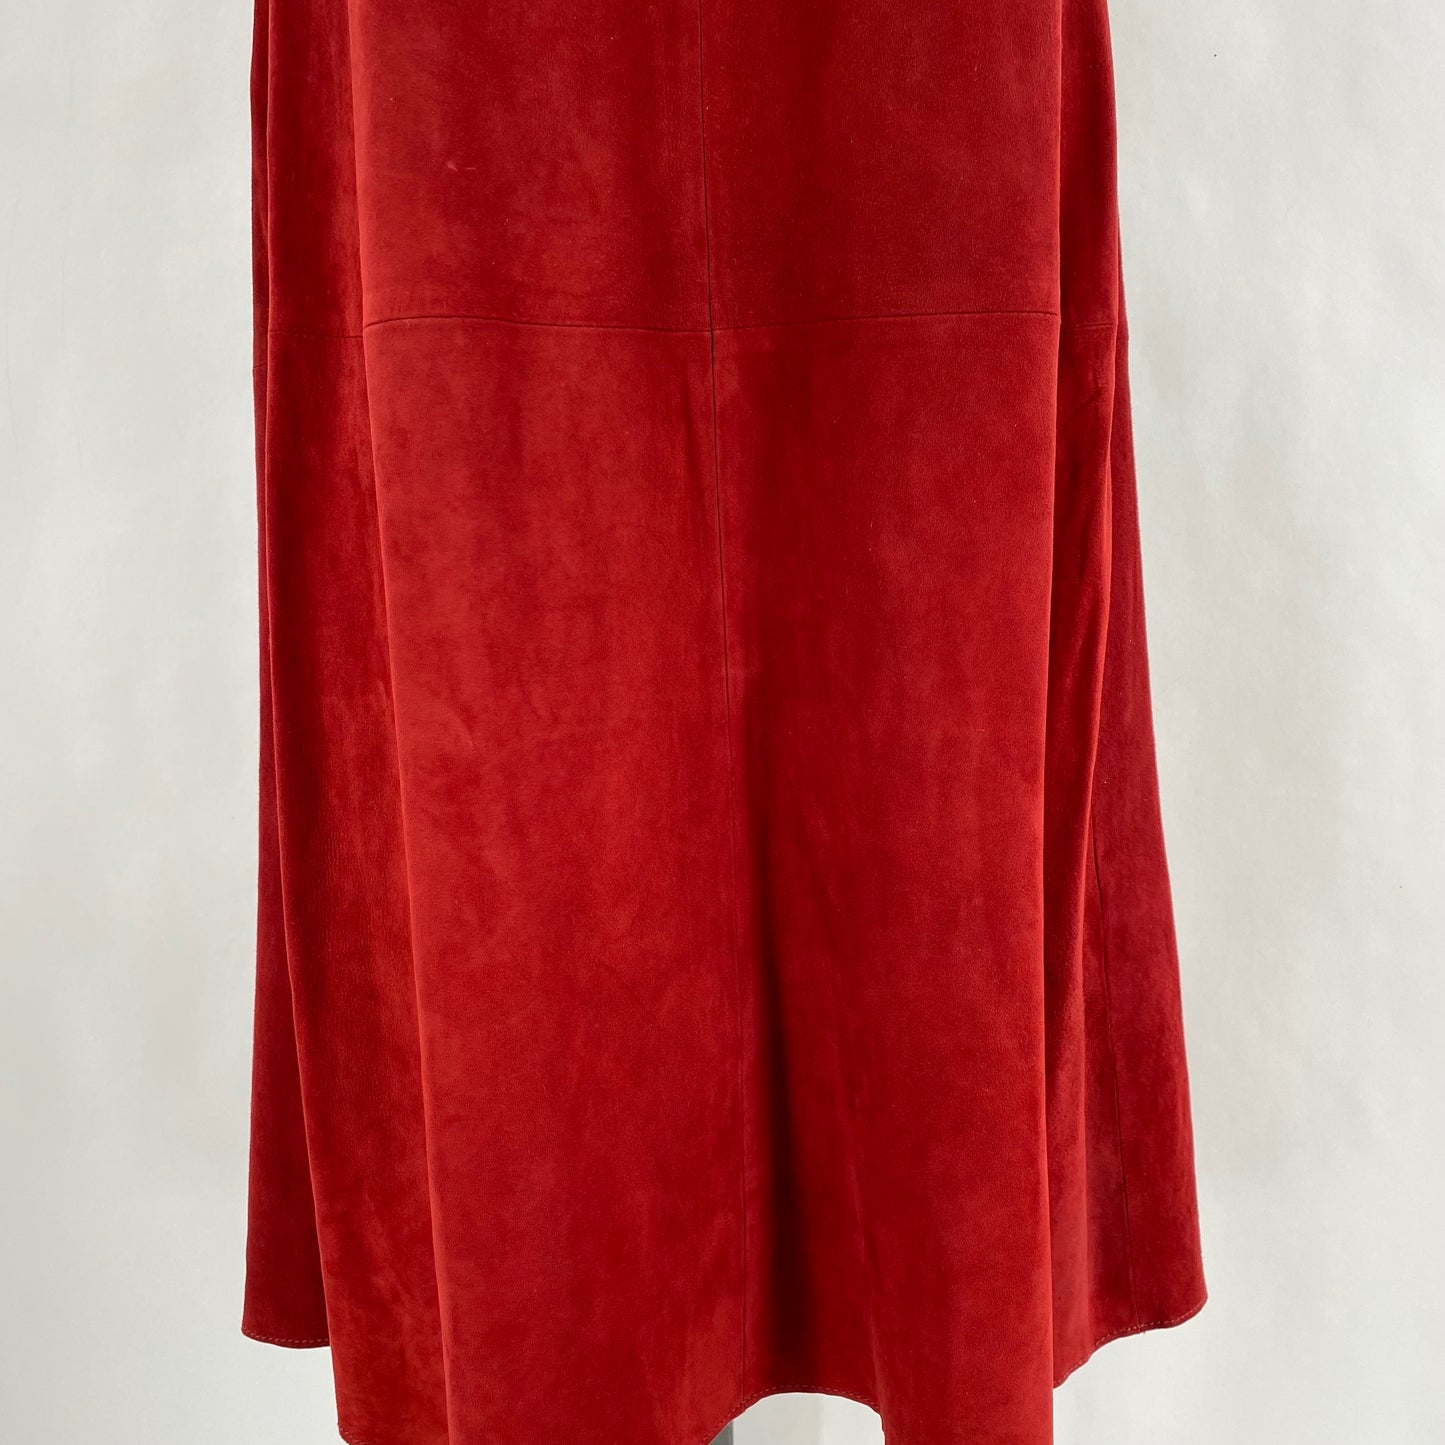 Size 4 THEORY Suede Dress